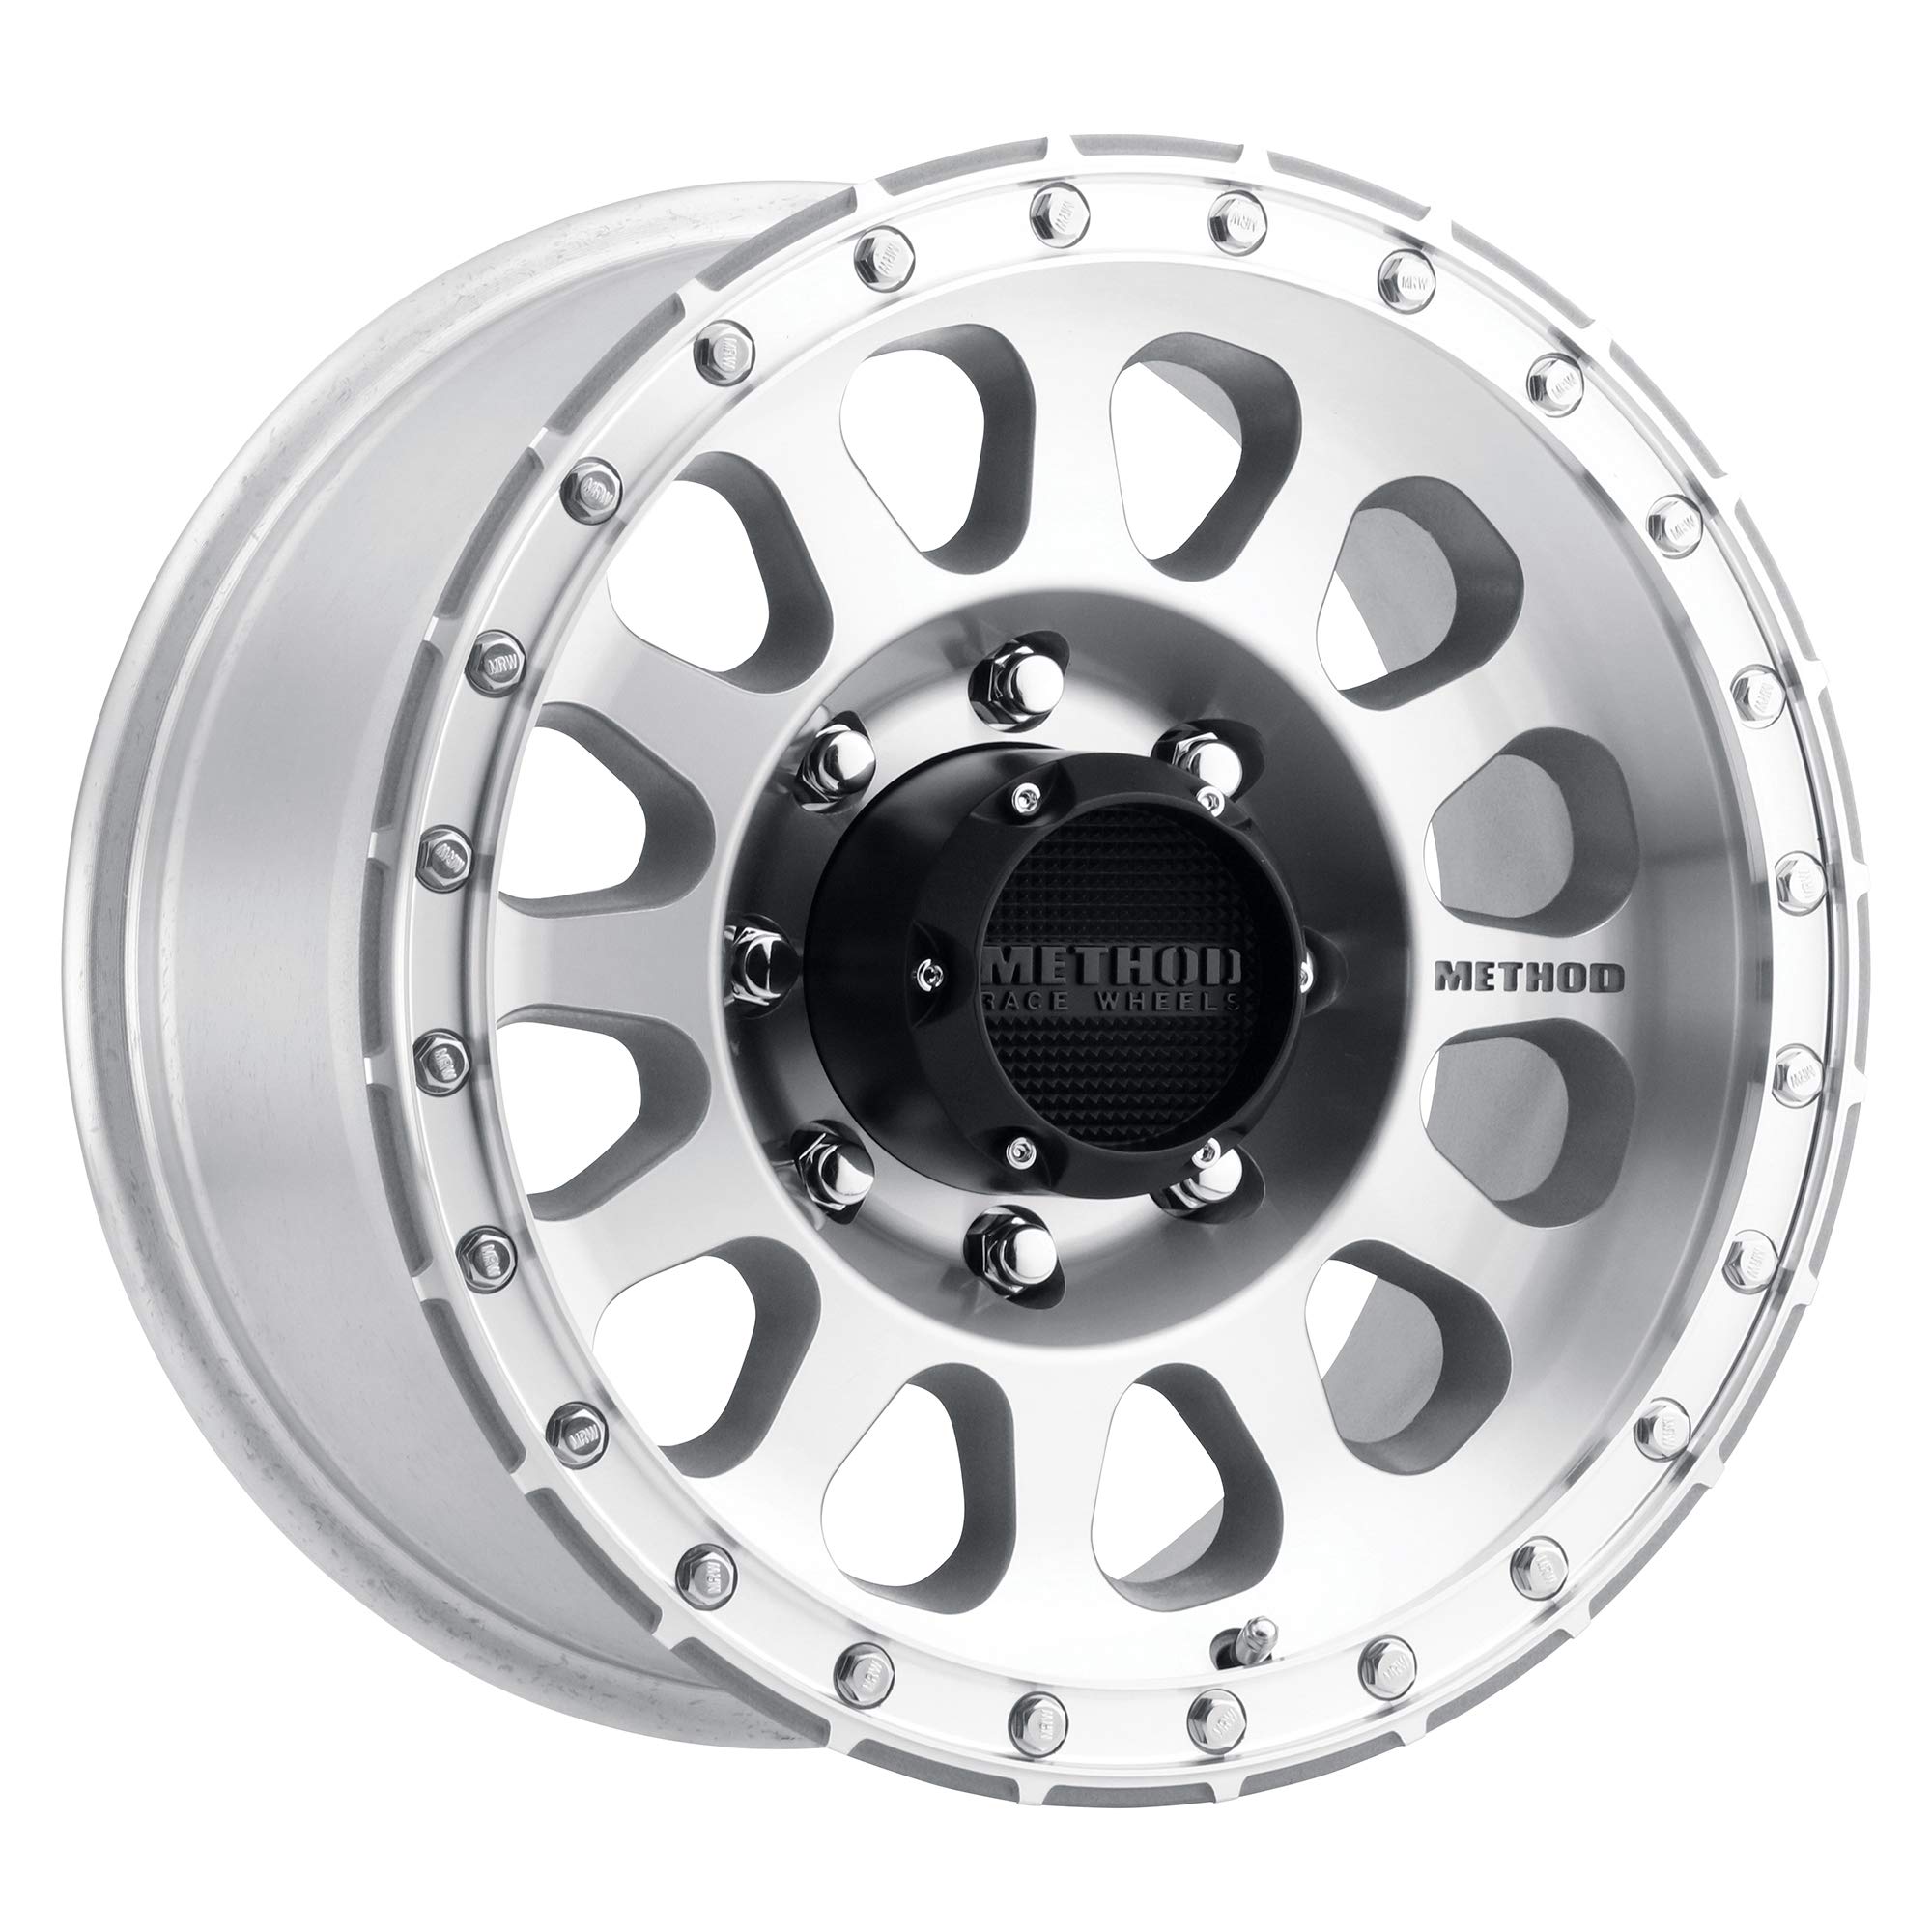 MR315,18X9,+18MM OFFSET,8X6.5,130.81MM CENTERBORE,MACHINED/CLEAR COAT